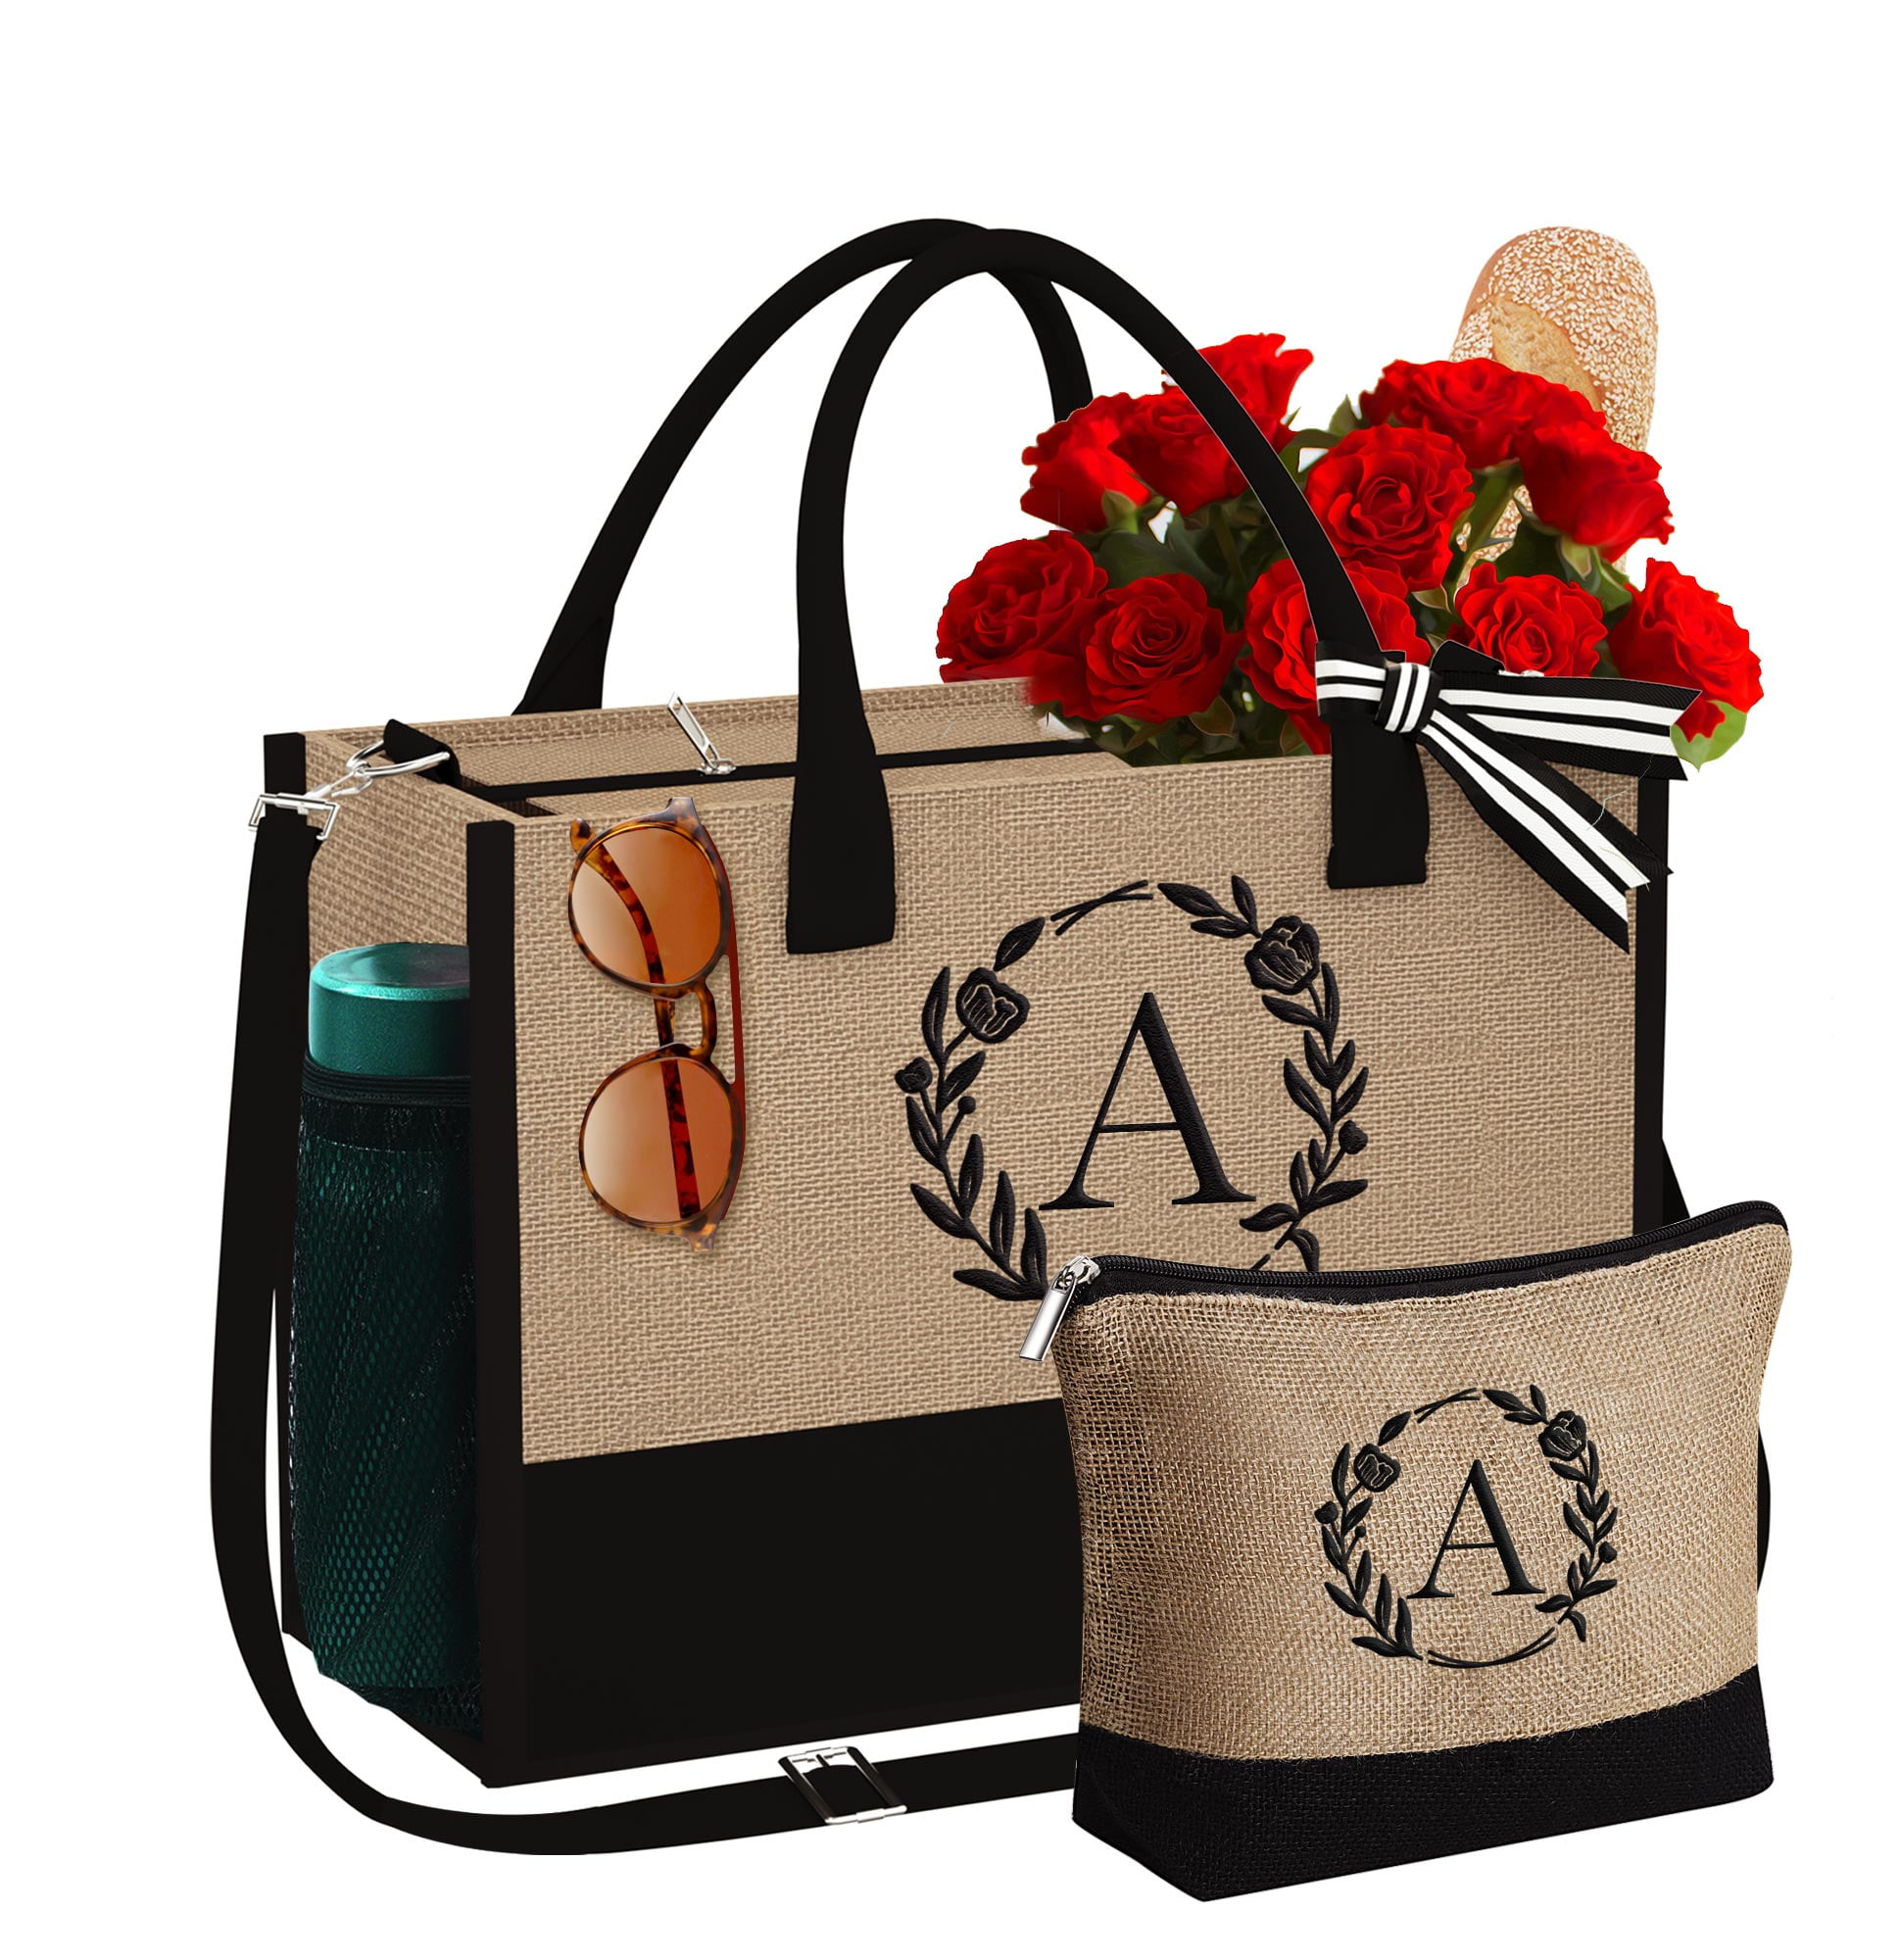 SMILEST Initial Jute Tote Bag with Makeup Bag Beach Bag with Pockets ...